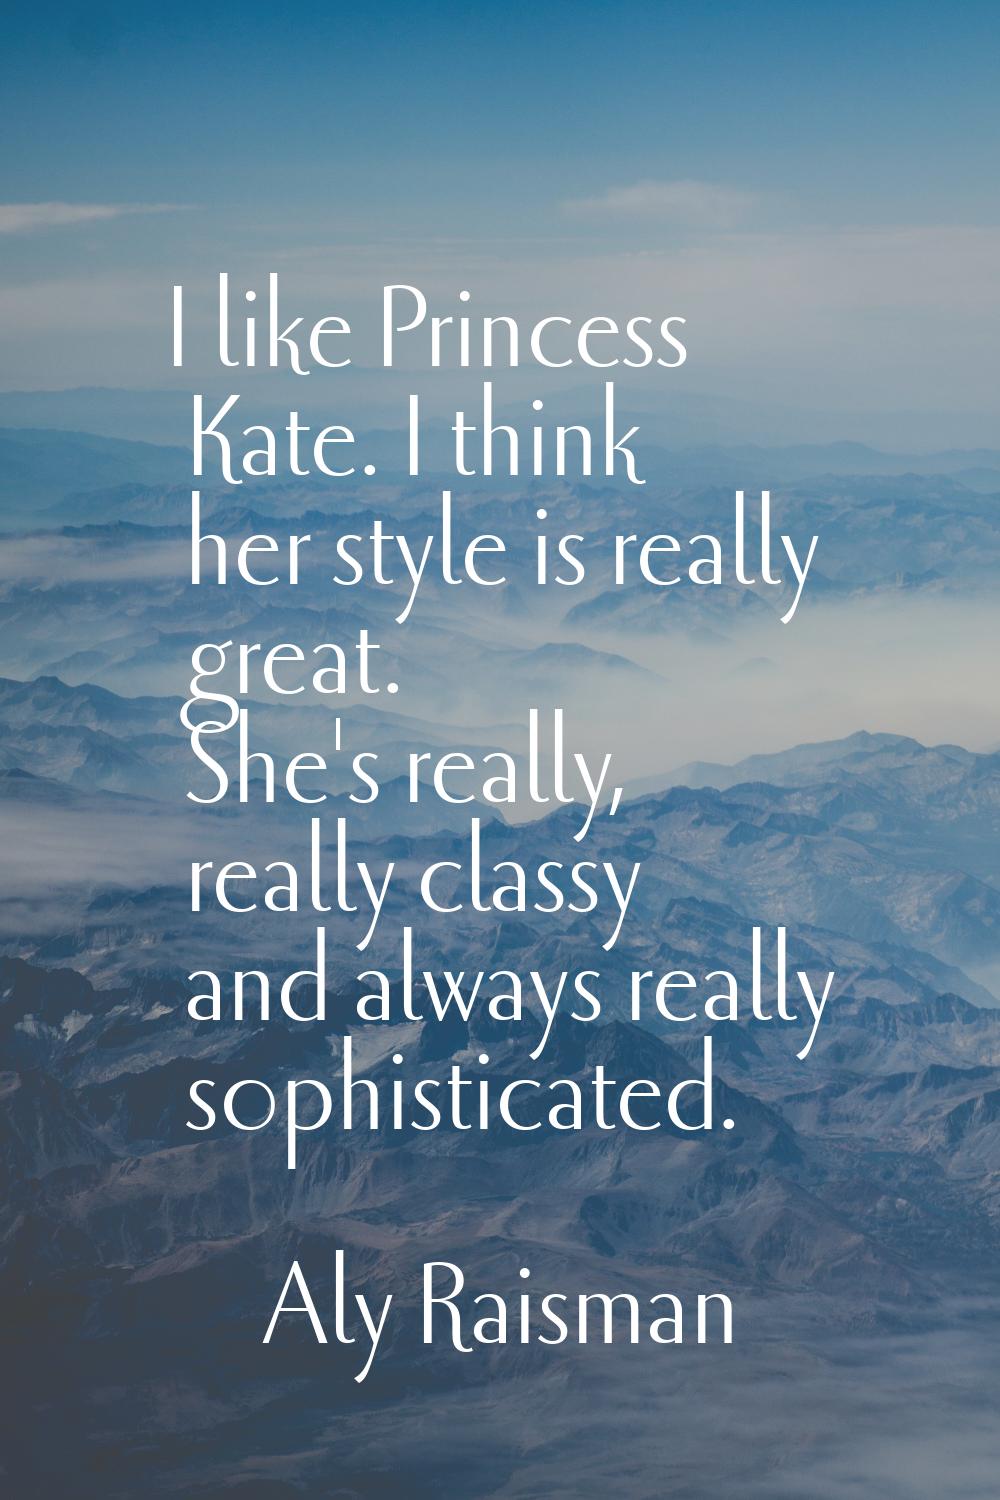 I like Princess Kate. I think her style is really great. She's really, really classy and always rea